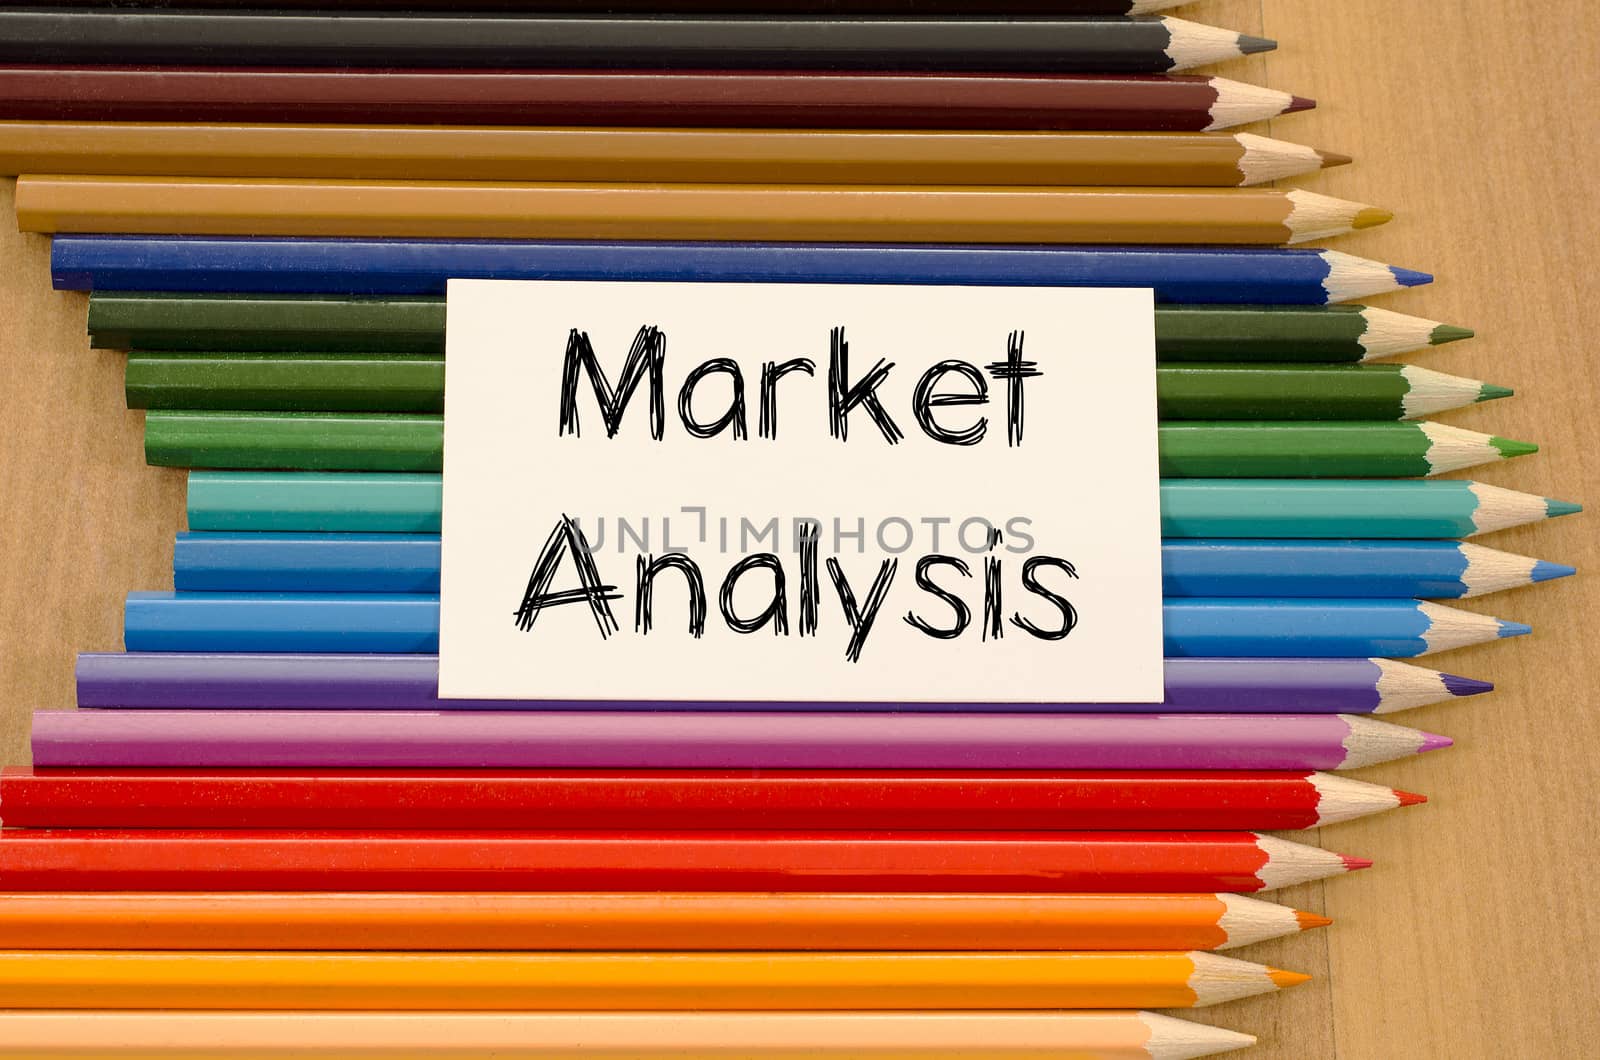 Market analysis text concept and colored pencil on wooden background